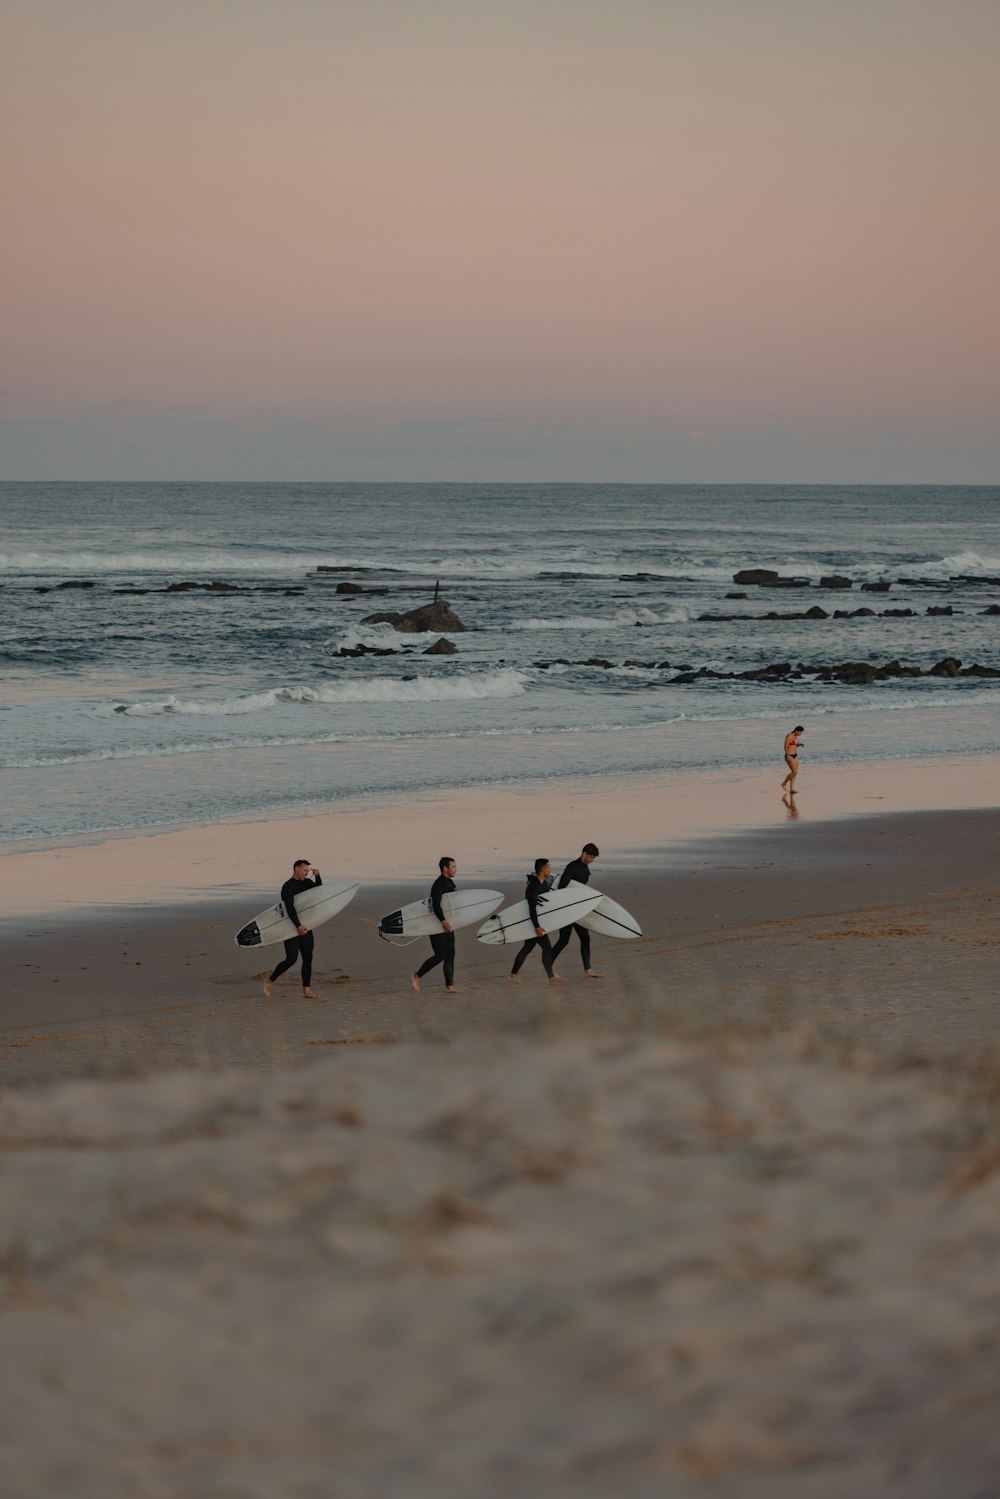 a group of people walking along a beach holding surfboards